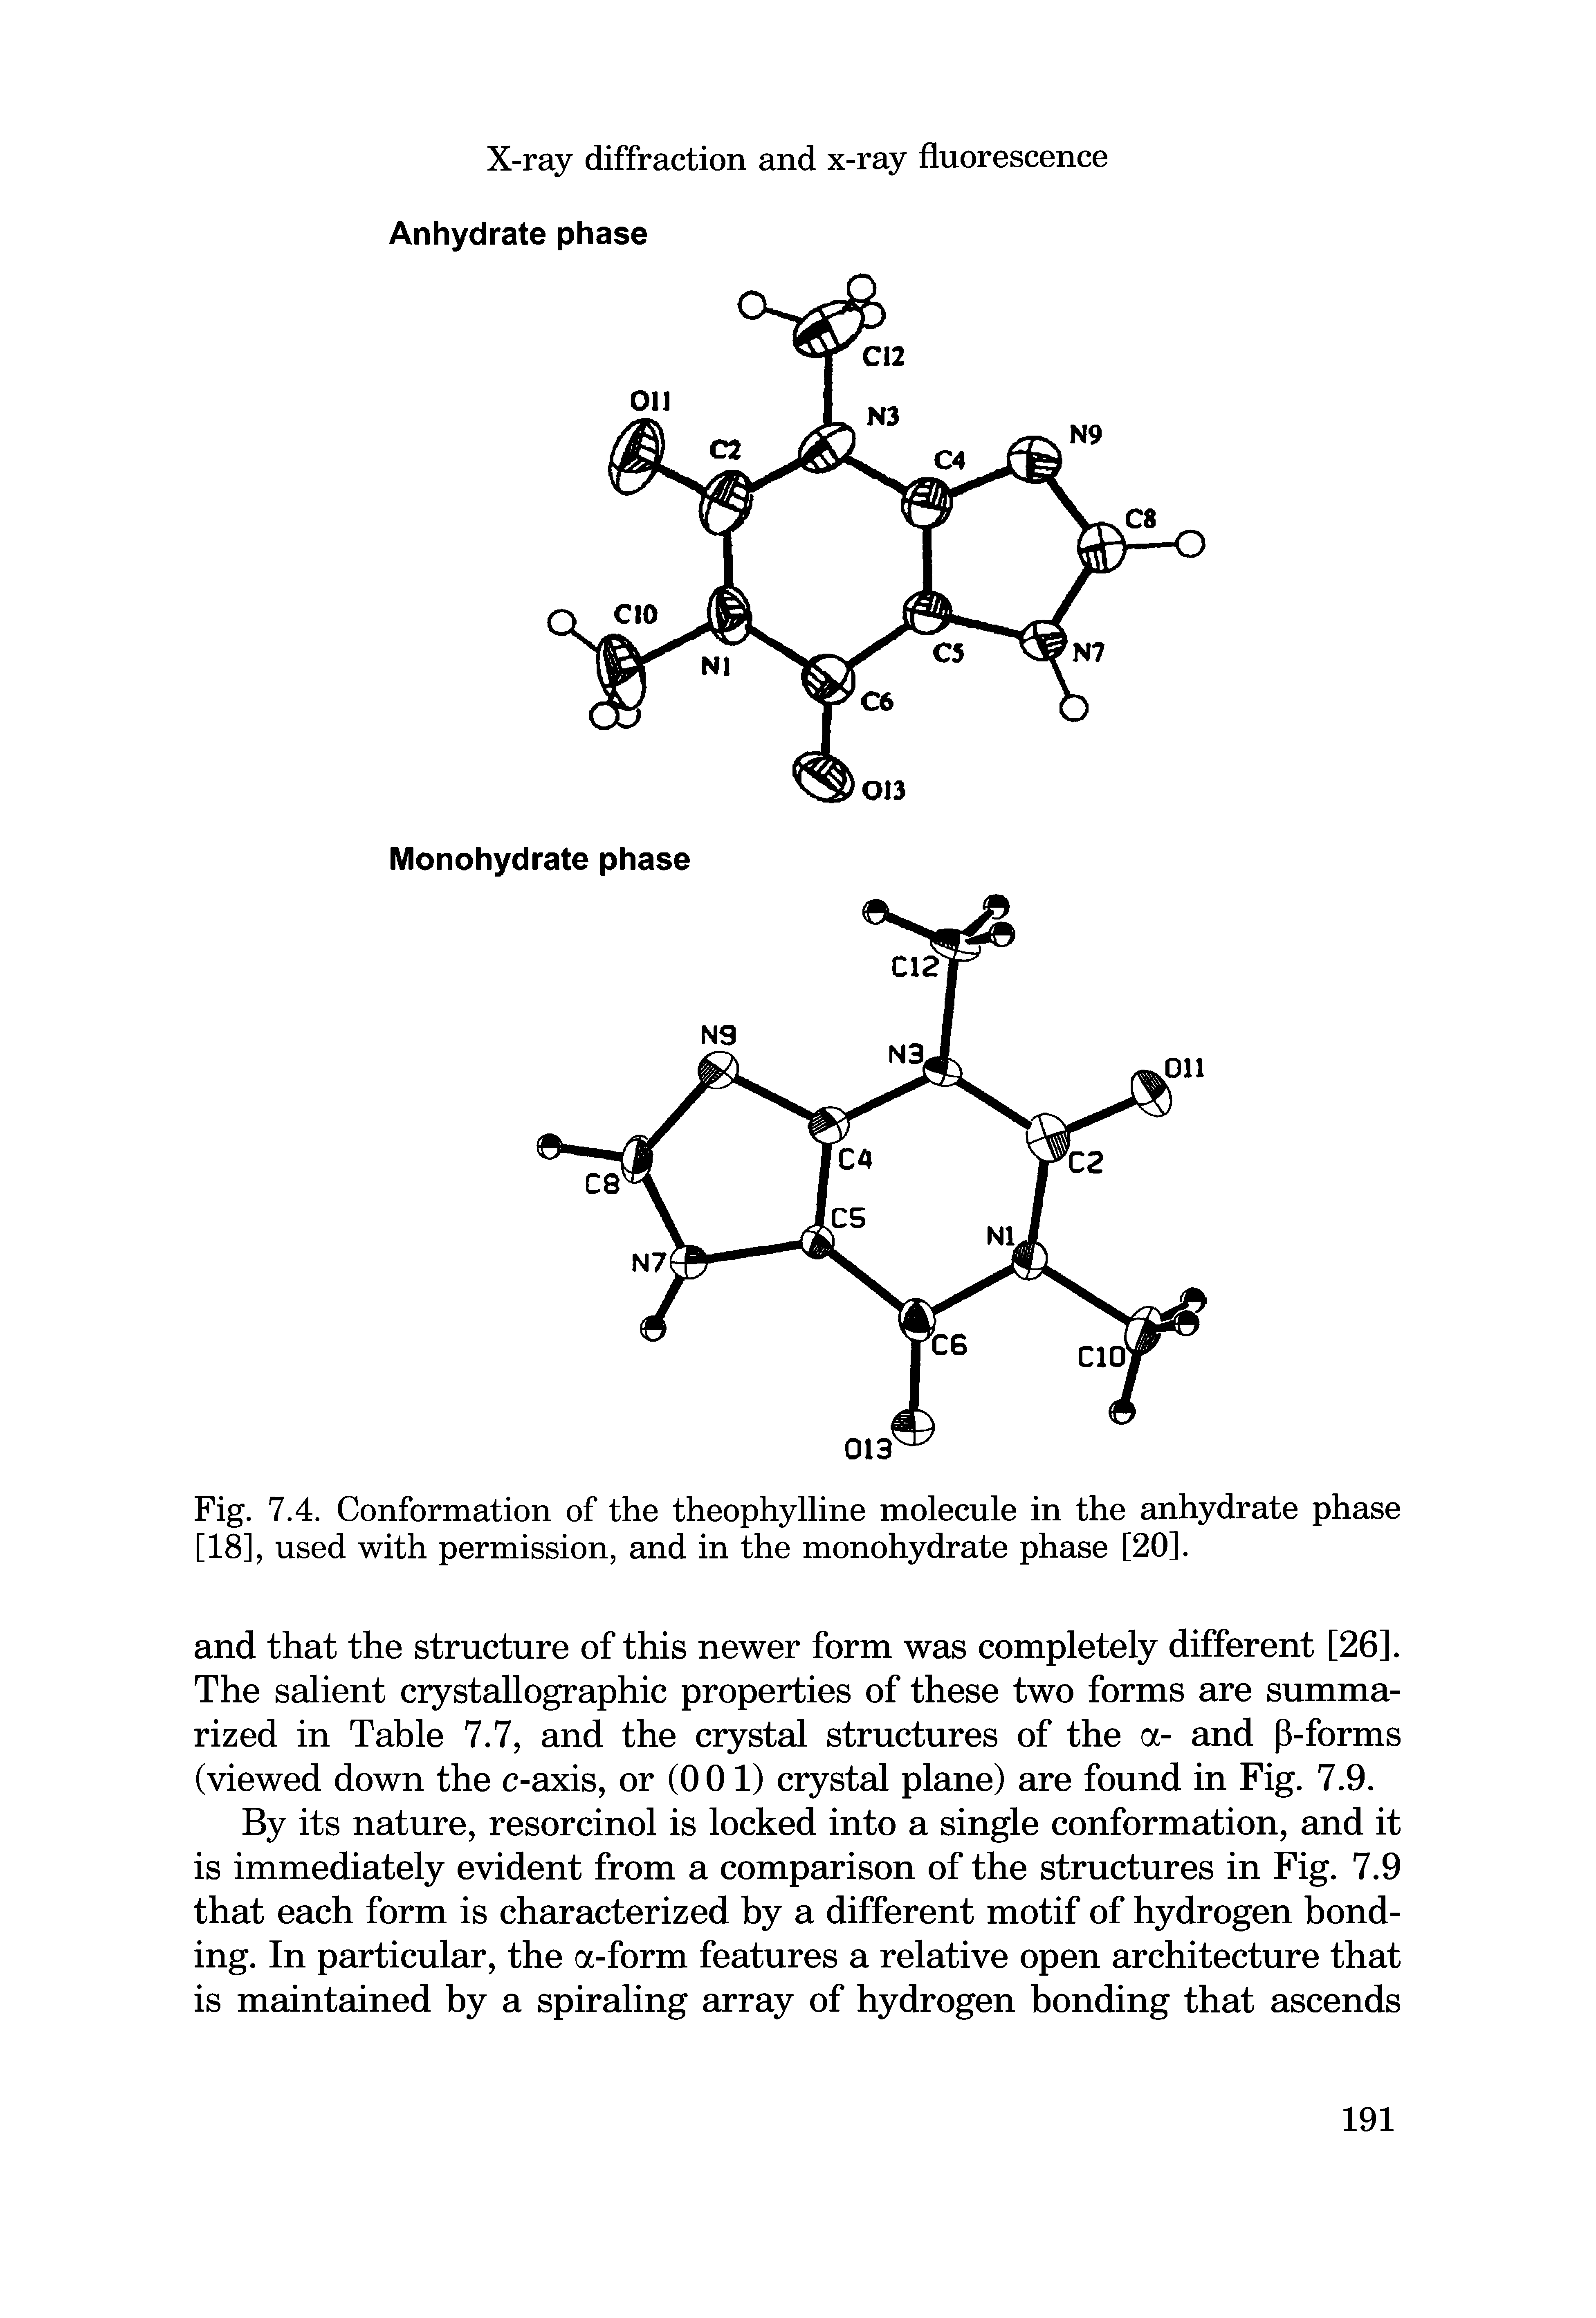 Fig. 7.4. Conformation of the theophylline molecule in the anhydrate phase [18], used with permission, and in the monohydrate phase [20].